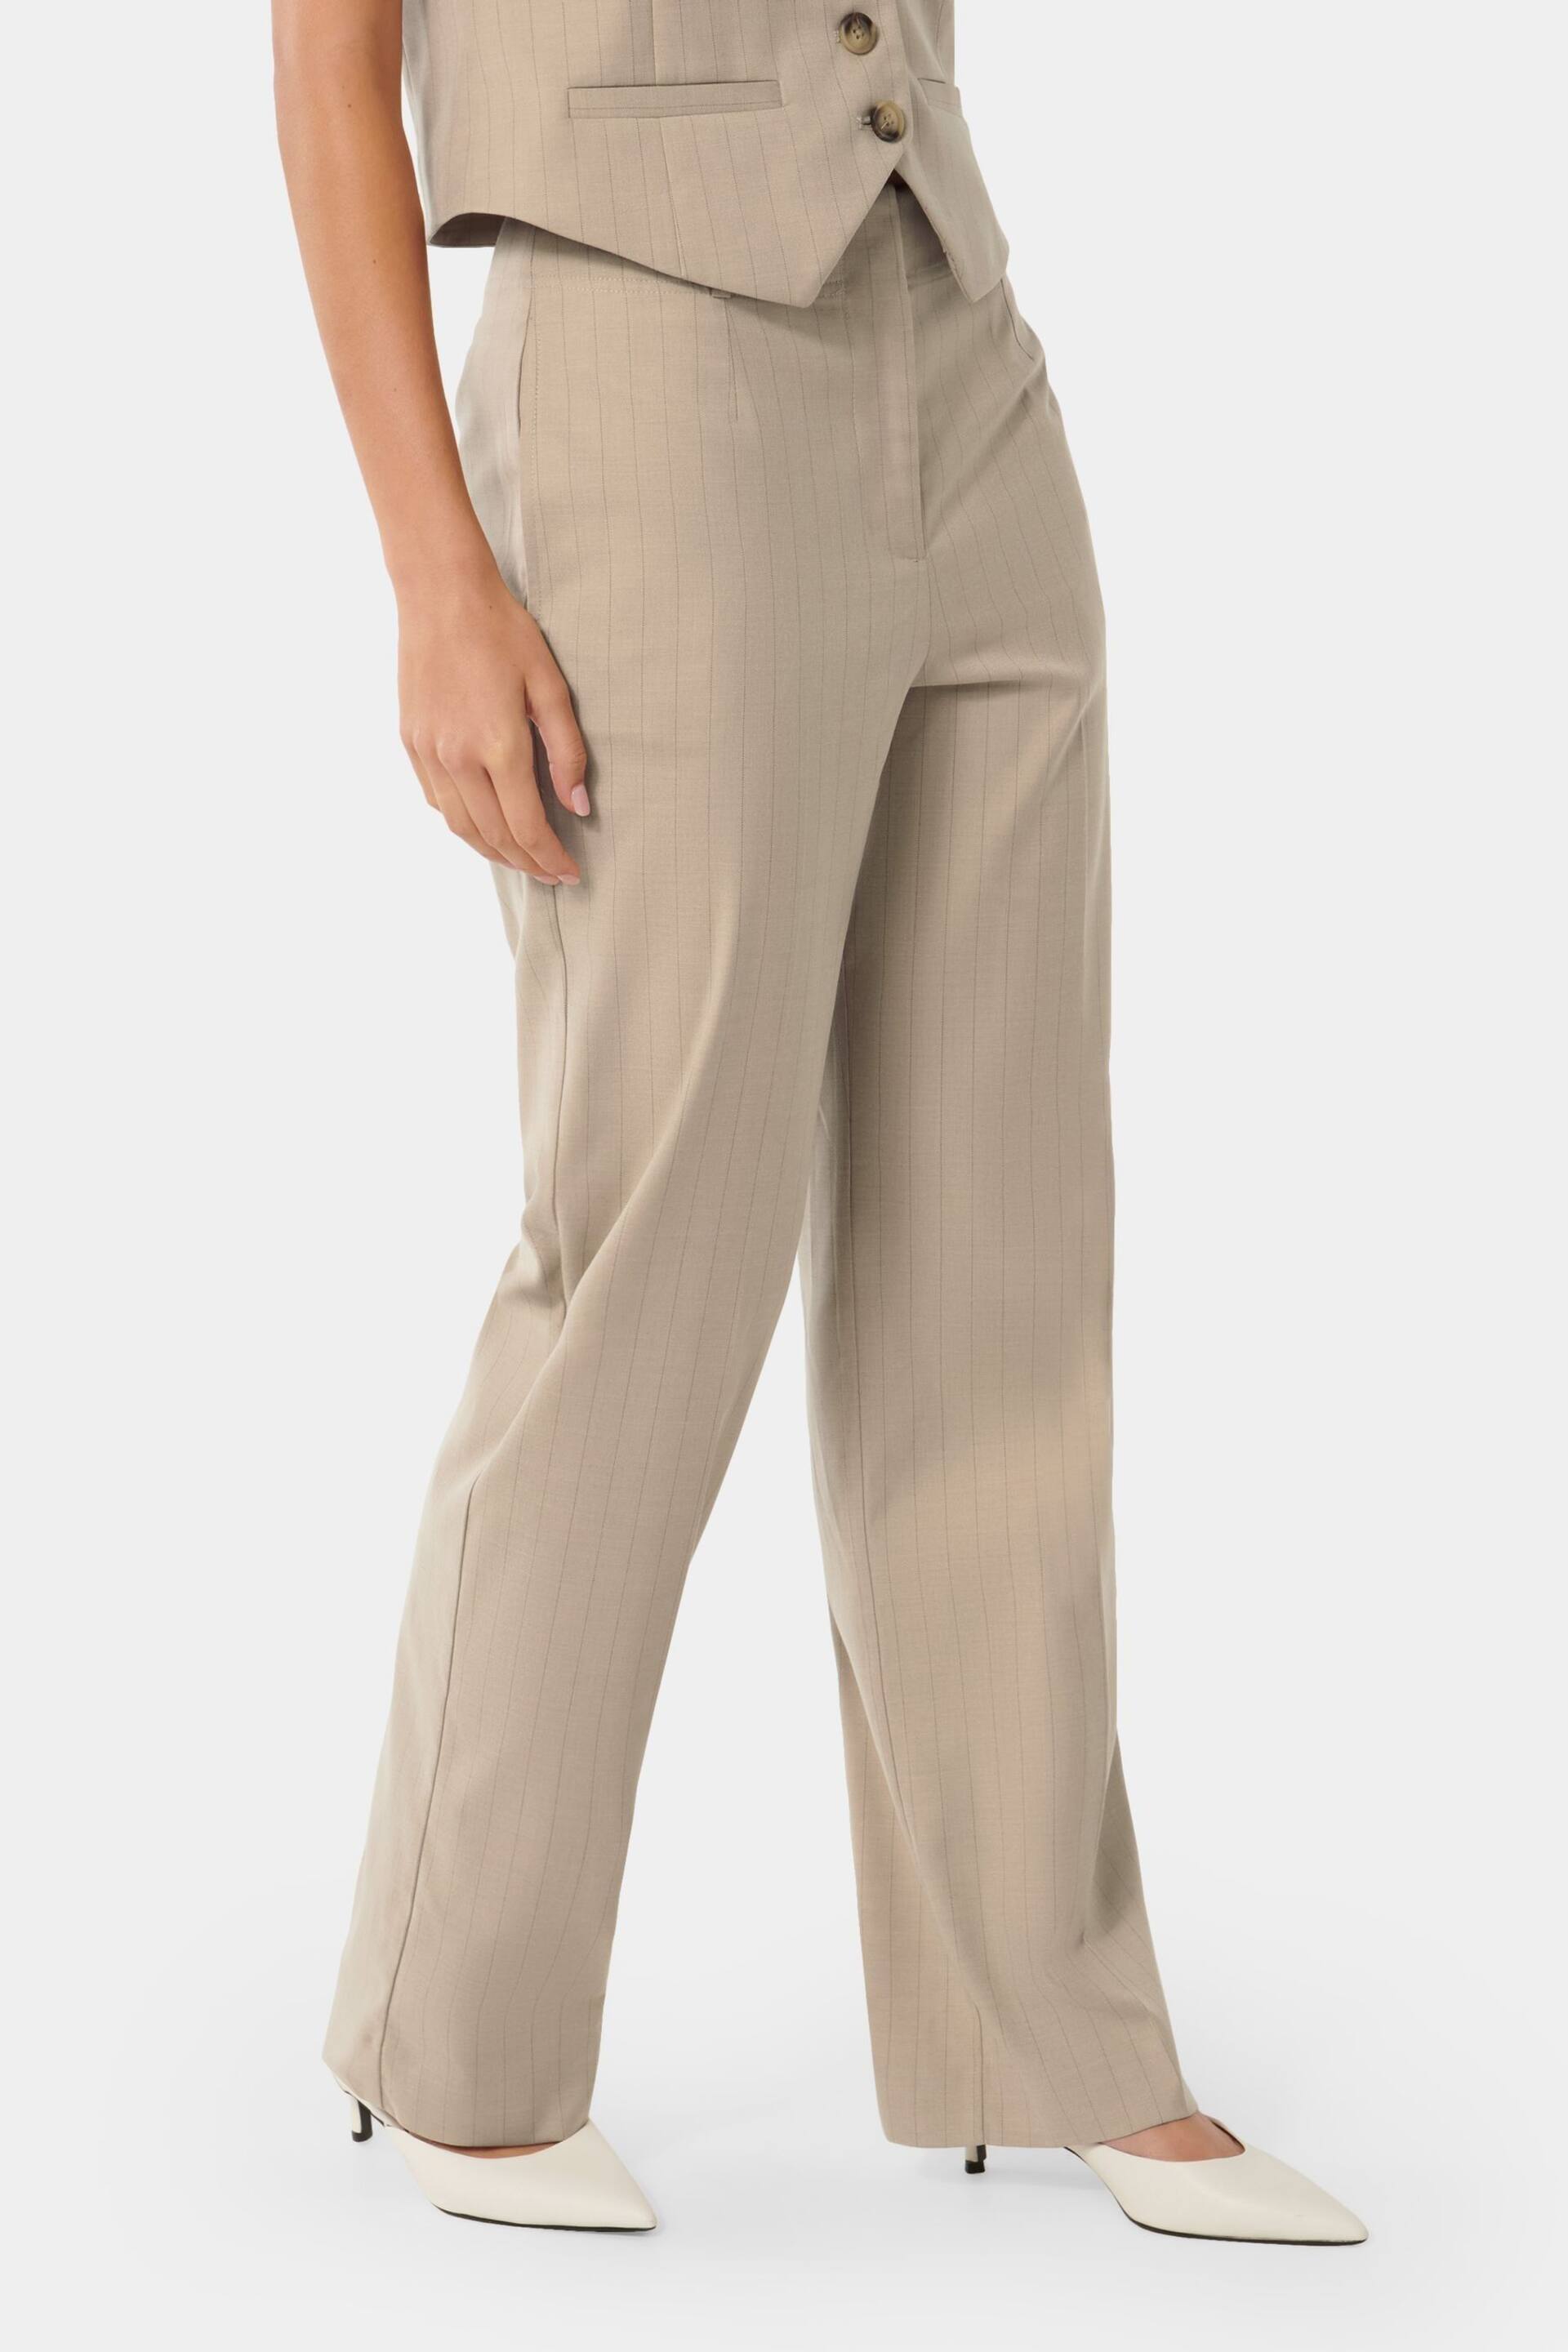 Forever New Natural Emmie Straight Leg Trousers - Image 3 of 5